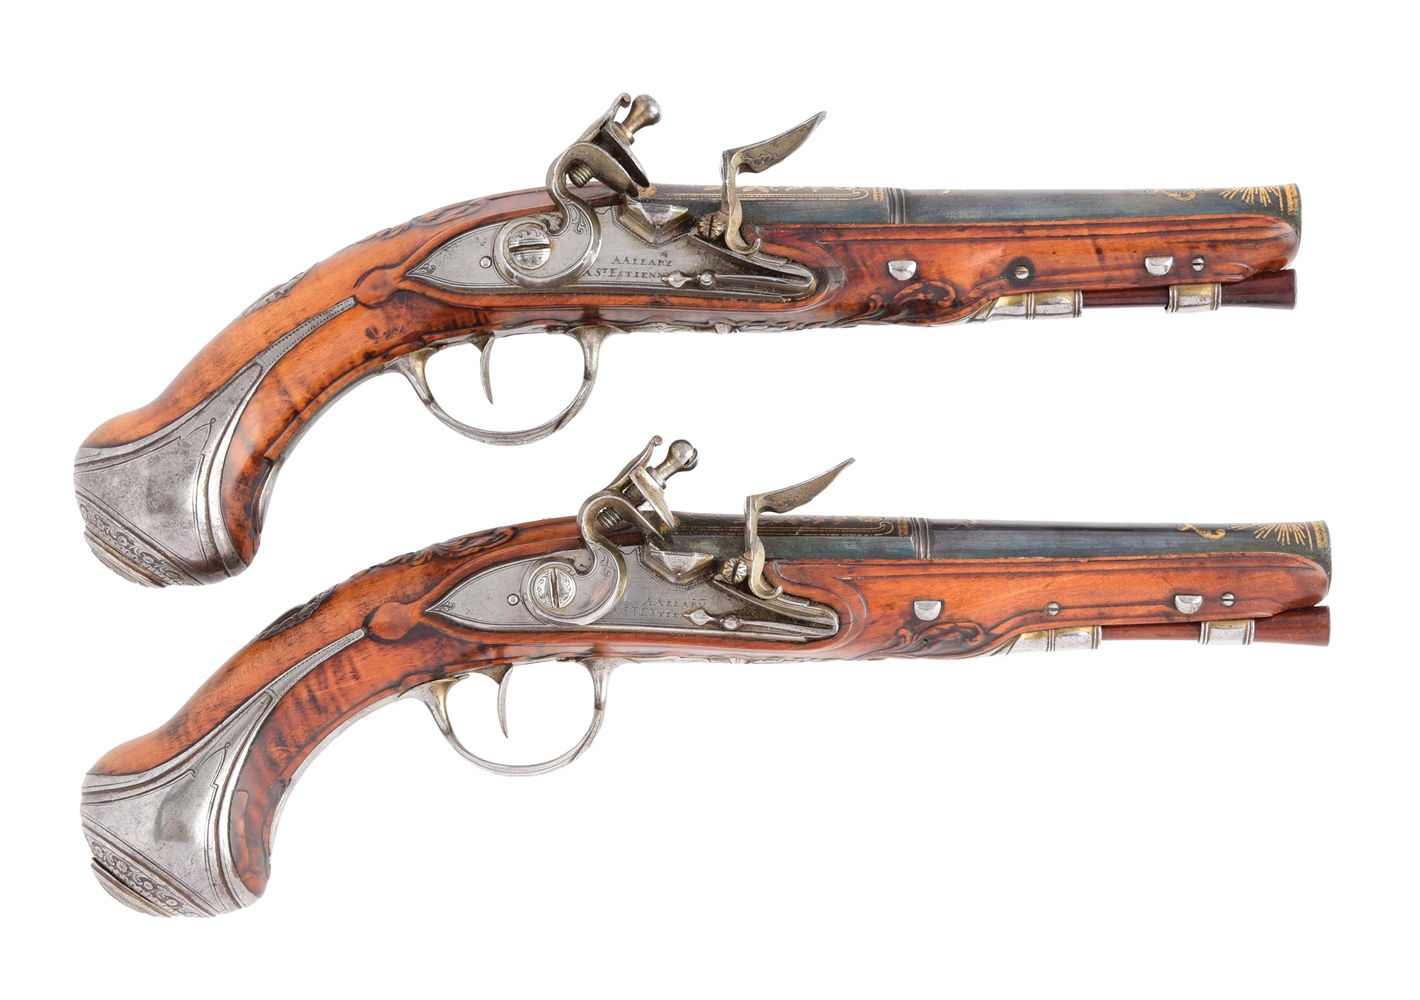 (A) EXTREMELY FINE PAIR OF FRENCH FLINTLOCK GREATCOAT PISTOLS, CIRCA 1750.